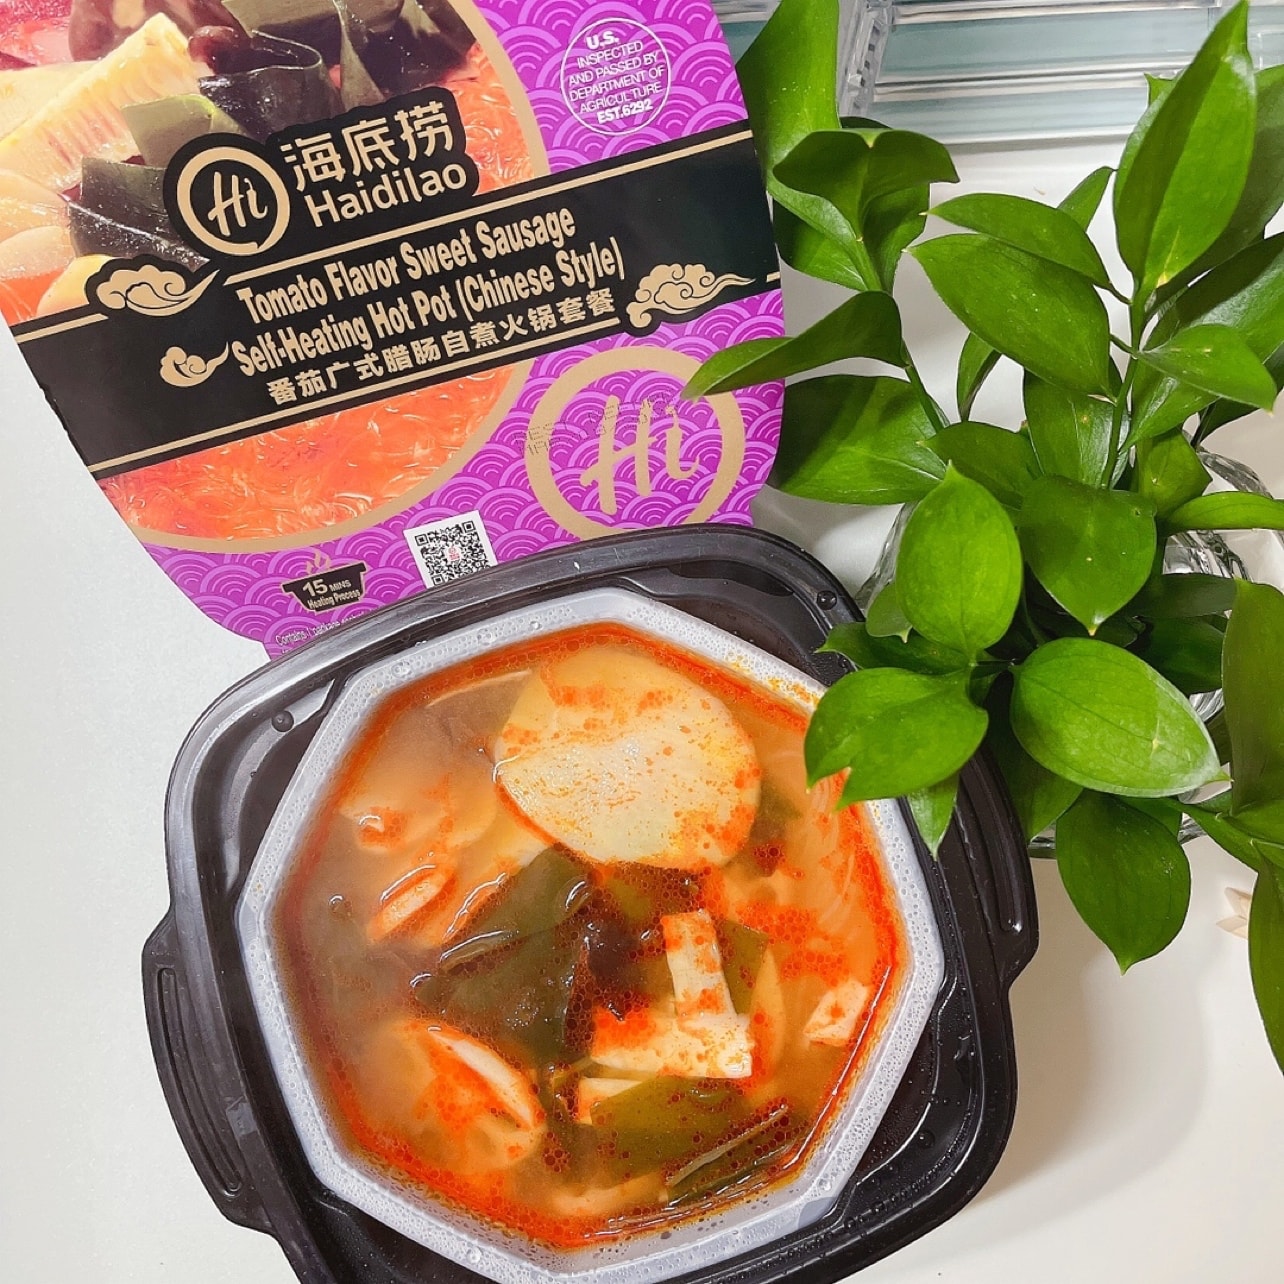 Self-Heating Tomato Flavor Hot Pot With Vegetables. : r/HMart